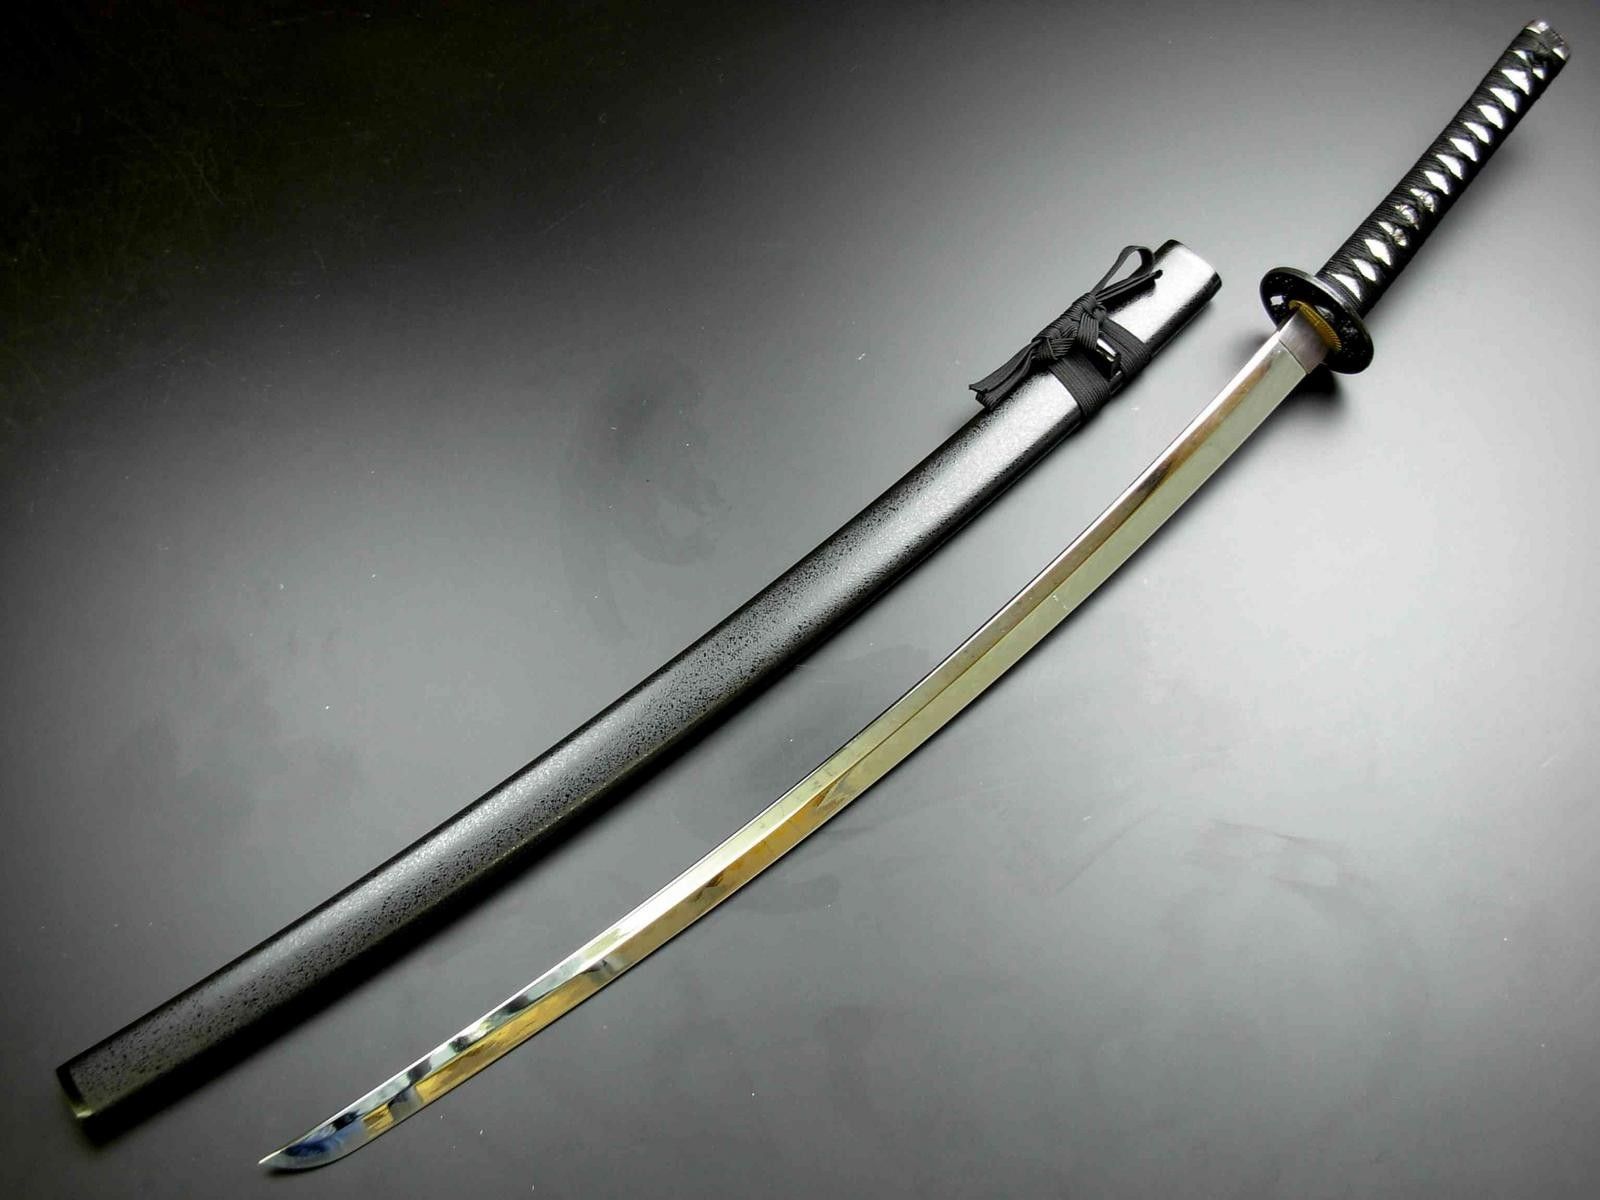 Free download Katana Sword Wallpaper Image amp Picture Becuo [1600x1200] for your Desktop, Mobile & Tablet. Explore Katana Sword Wallpaper. Samurai Sword Wallpaper, Cool Sword Wallpaper, Female Samurai Wallpaper